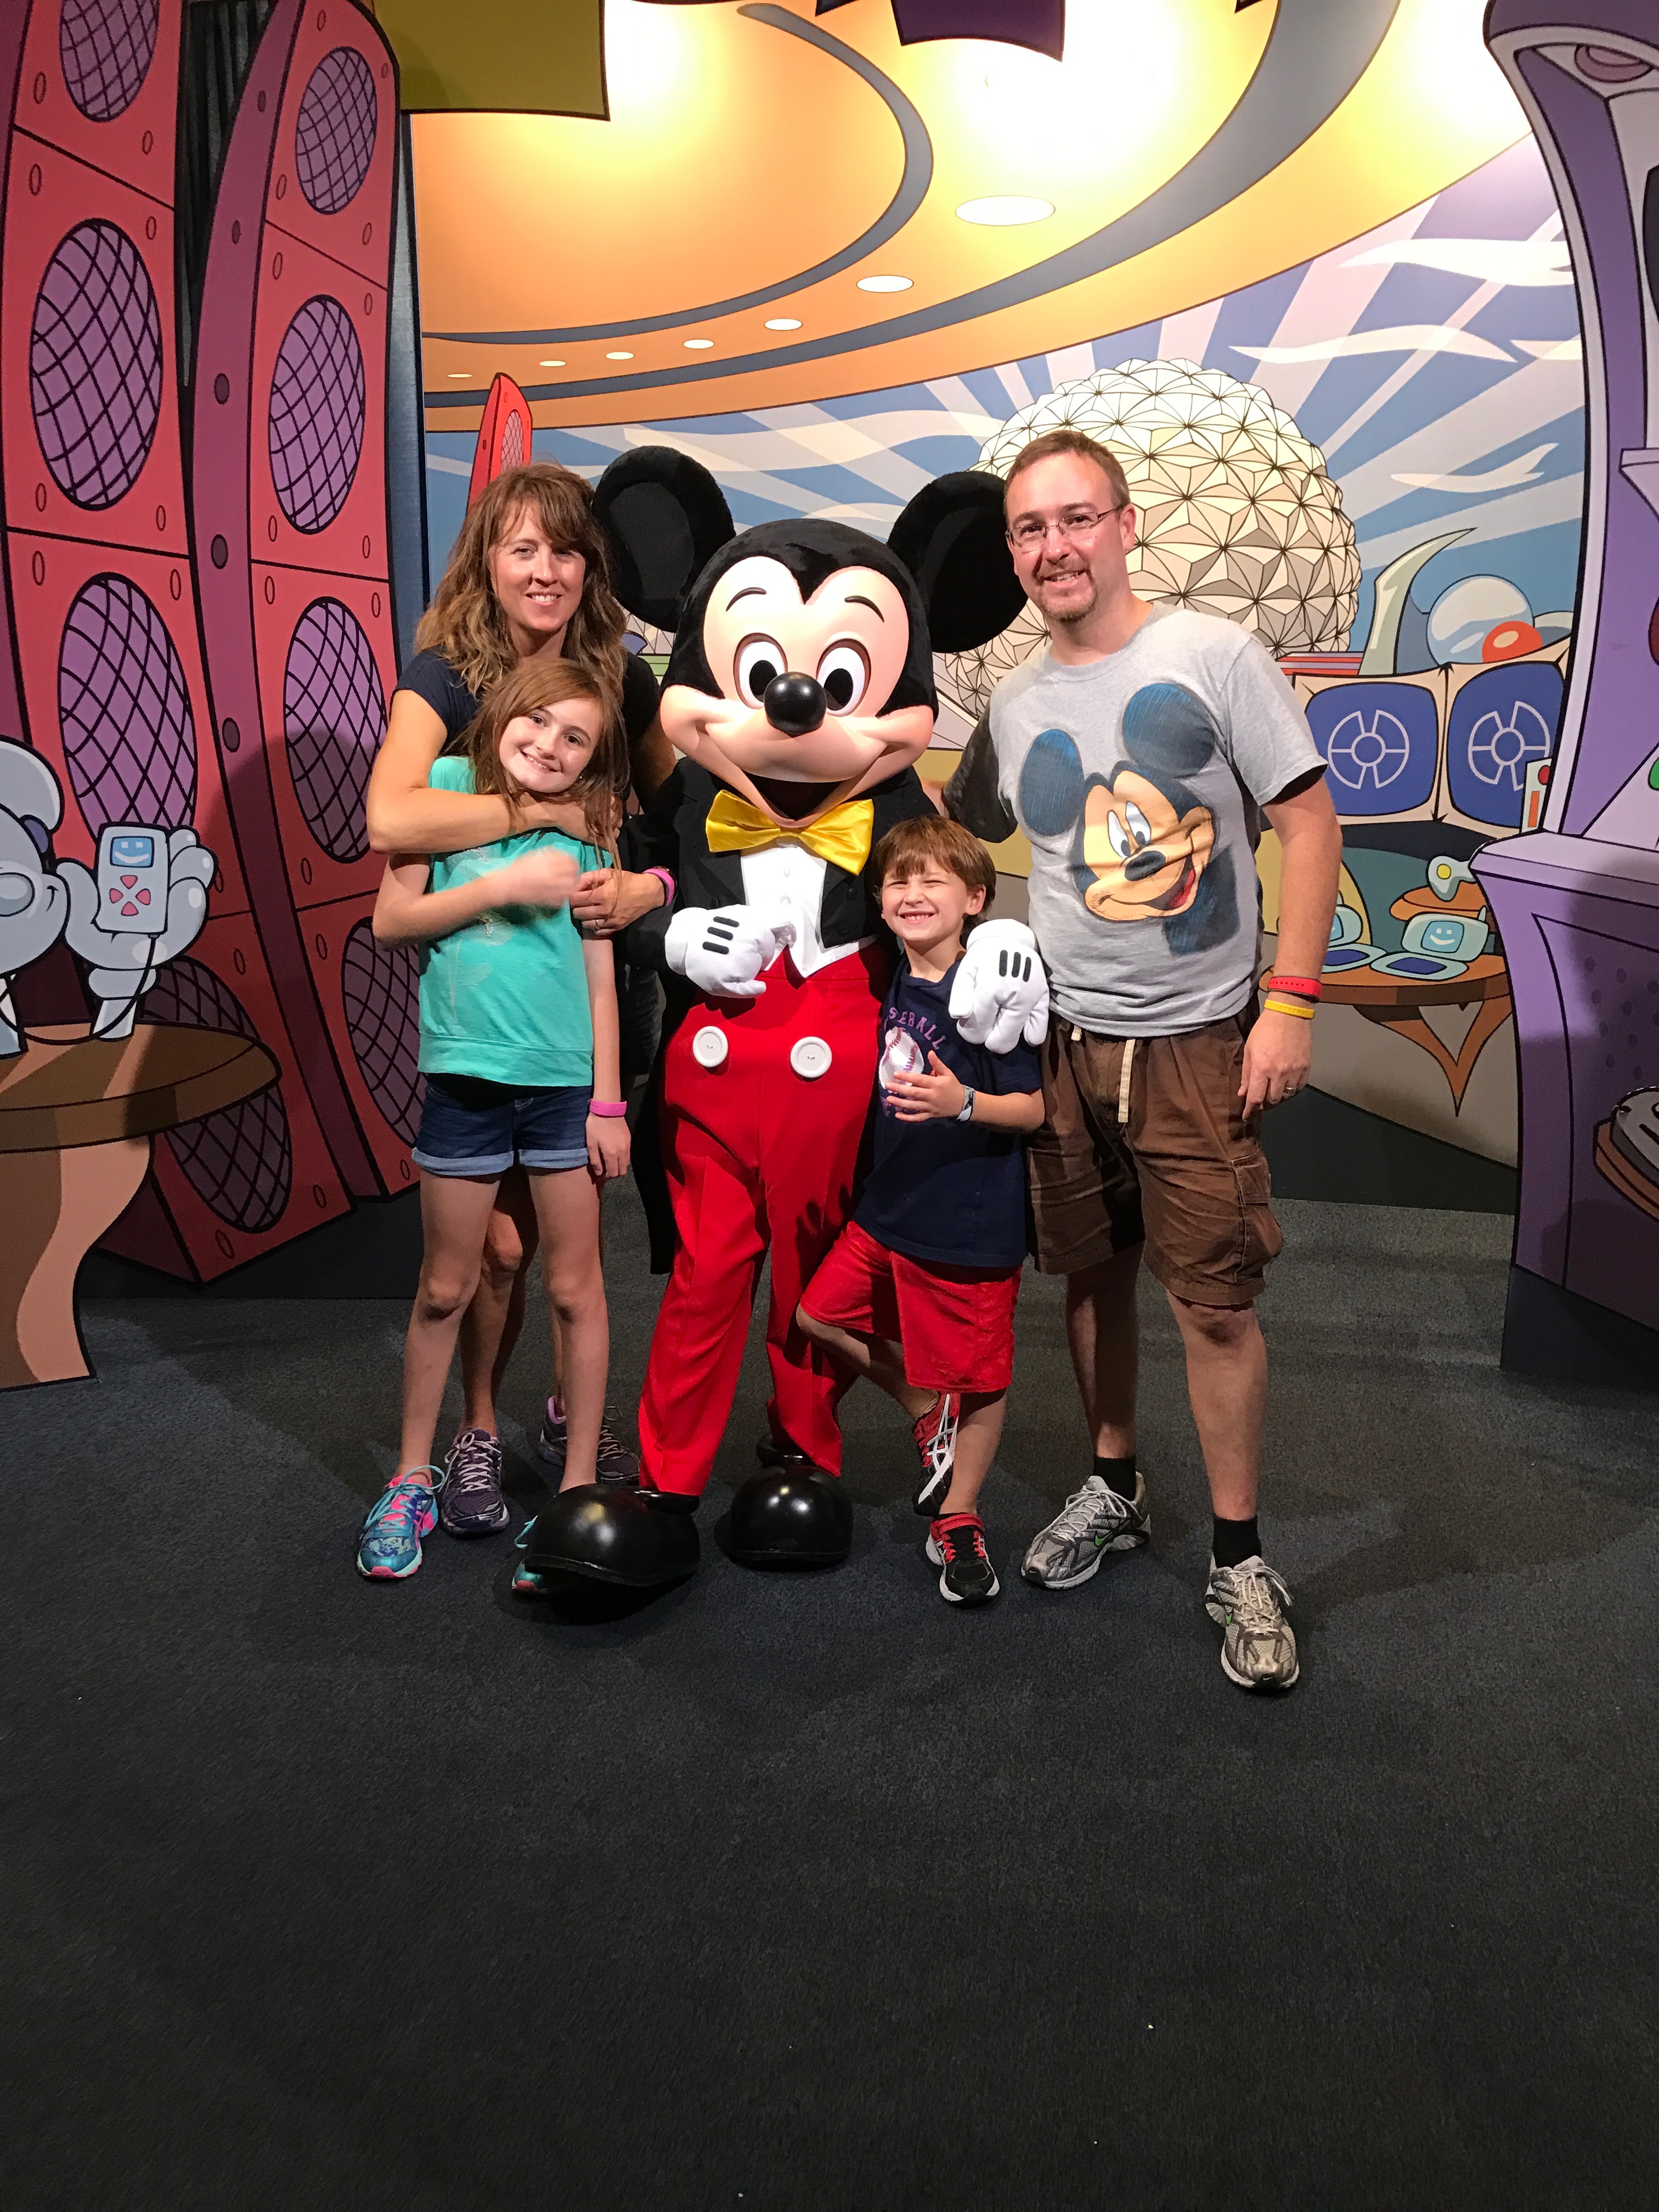 a group of people posing with a cartoon character